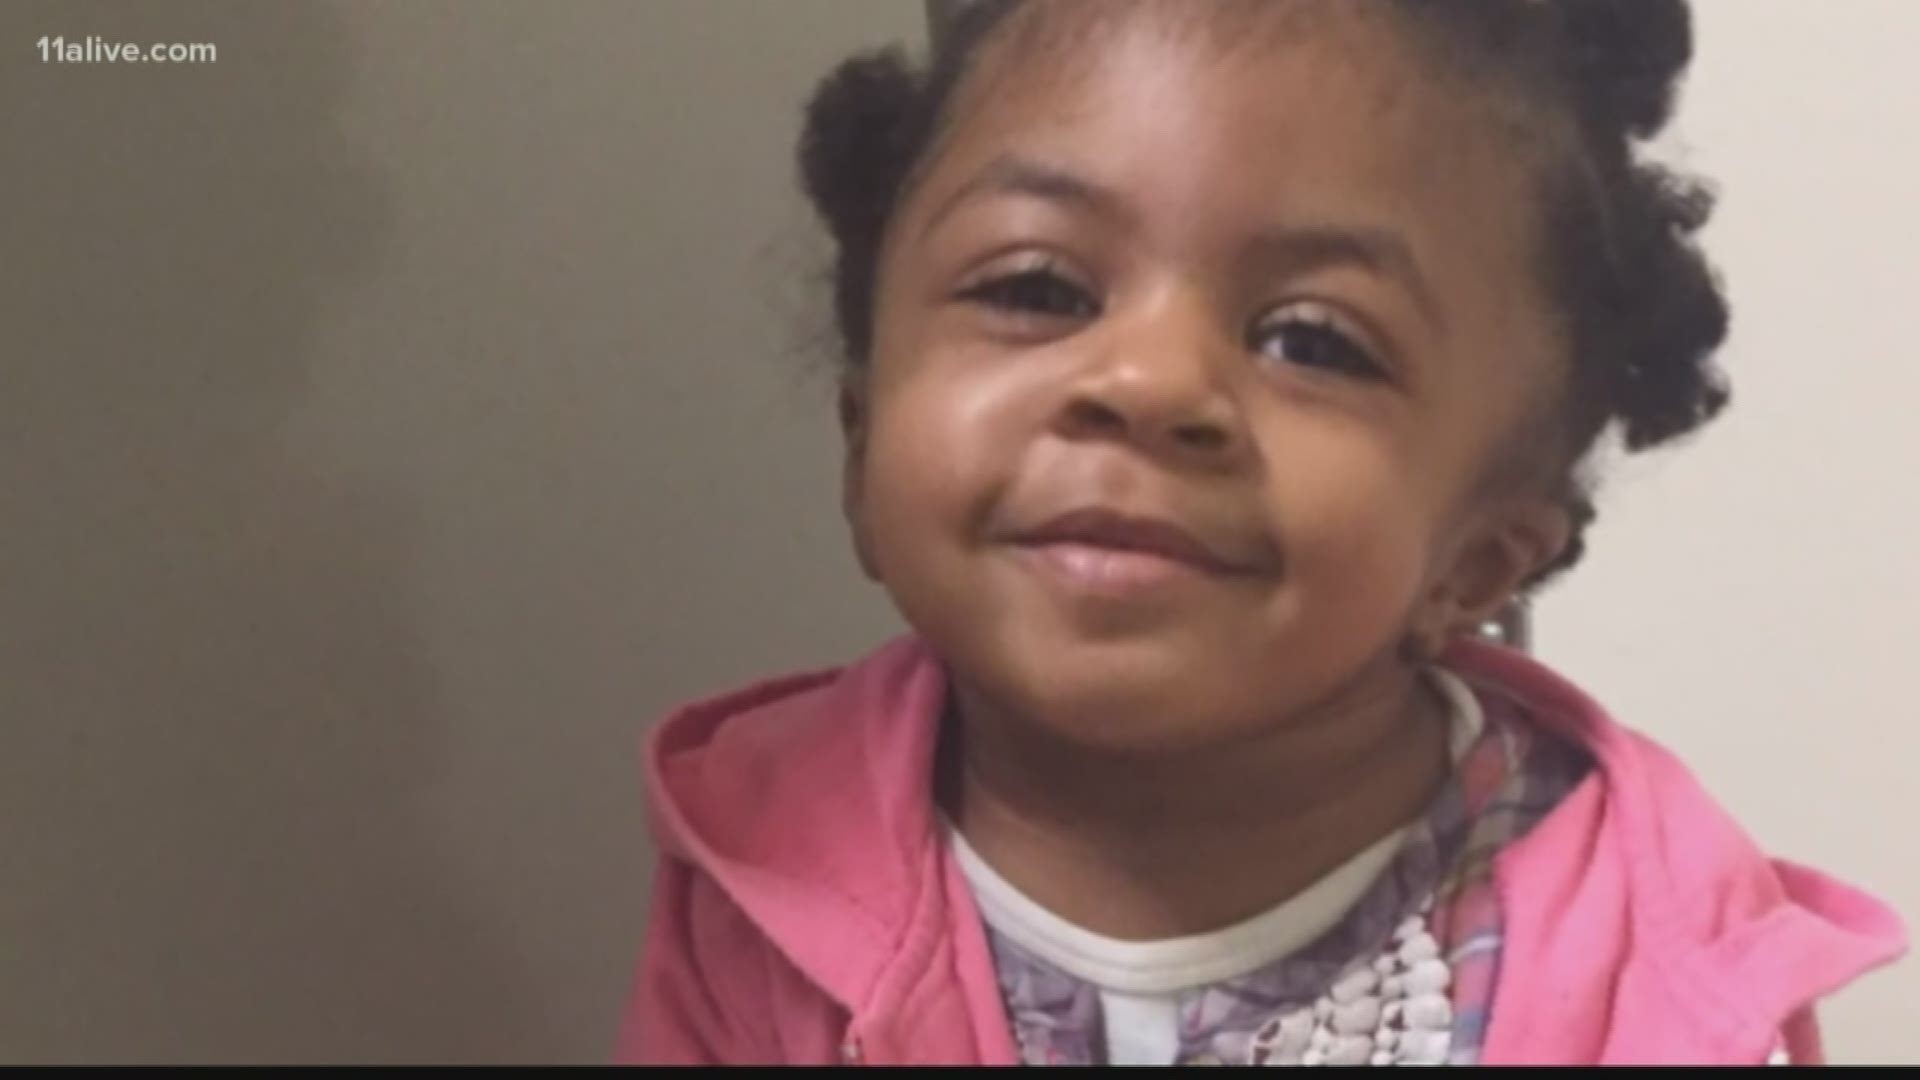 Reygan Moon, 2 years old, was just 14 pounds when she died.